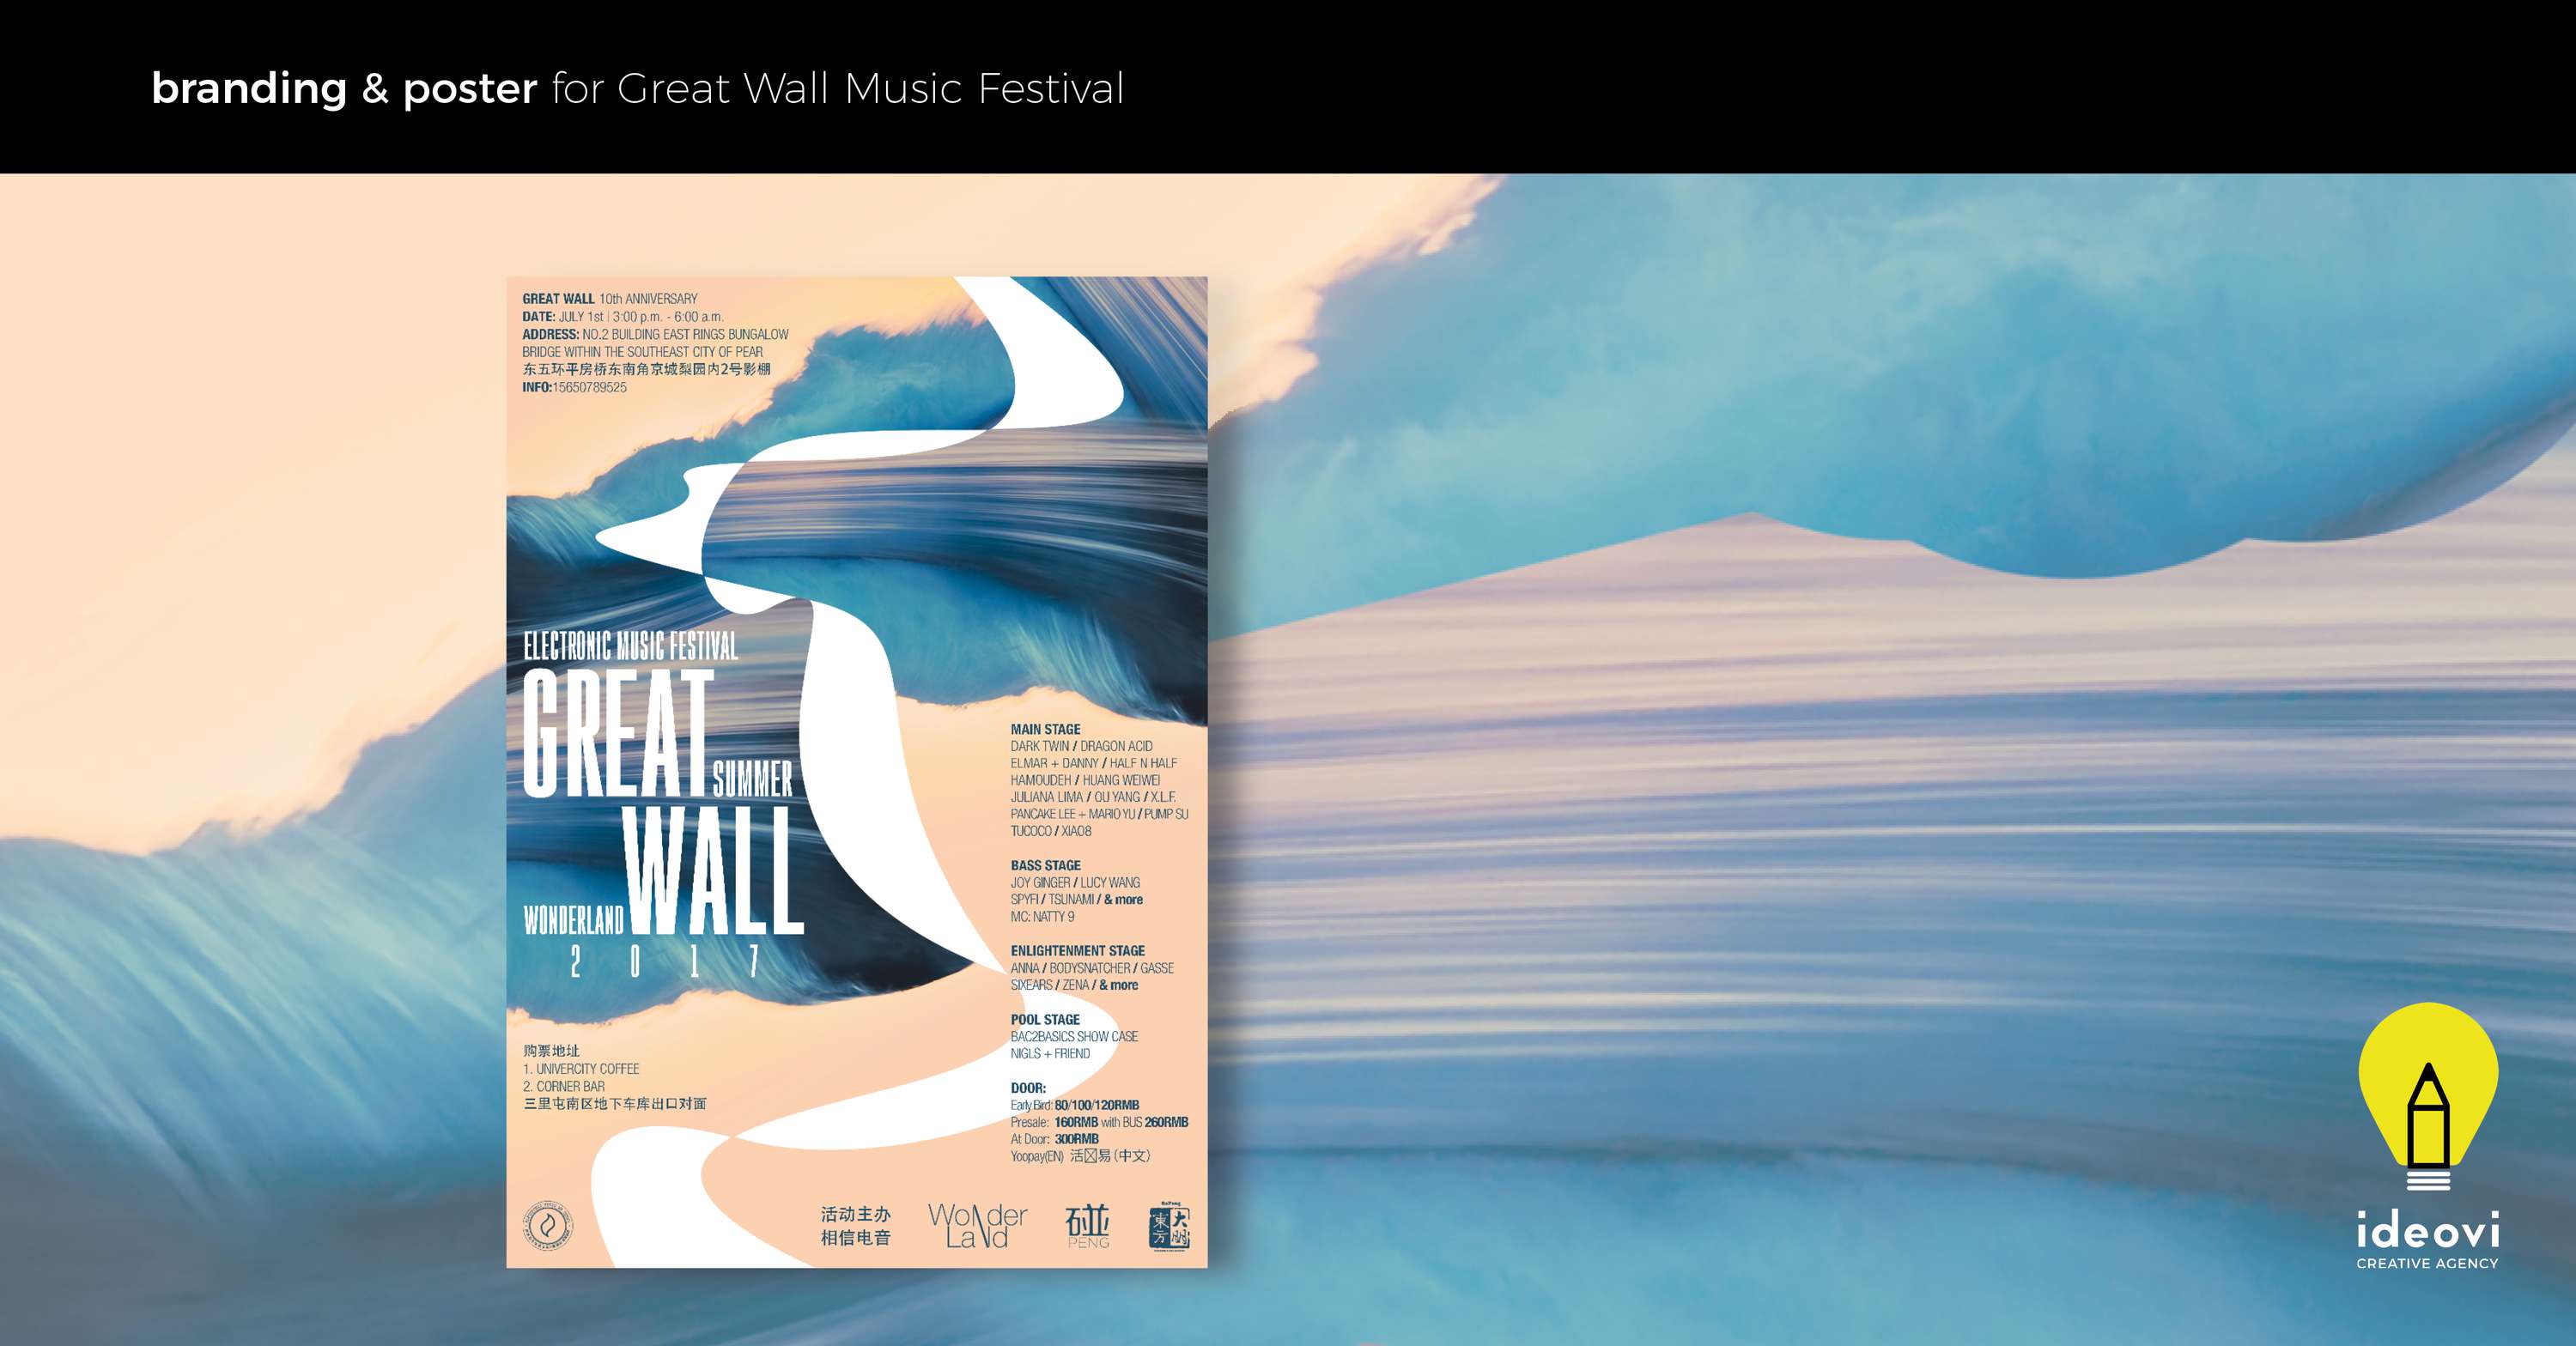 Great Wall music festival 